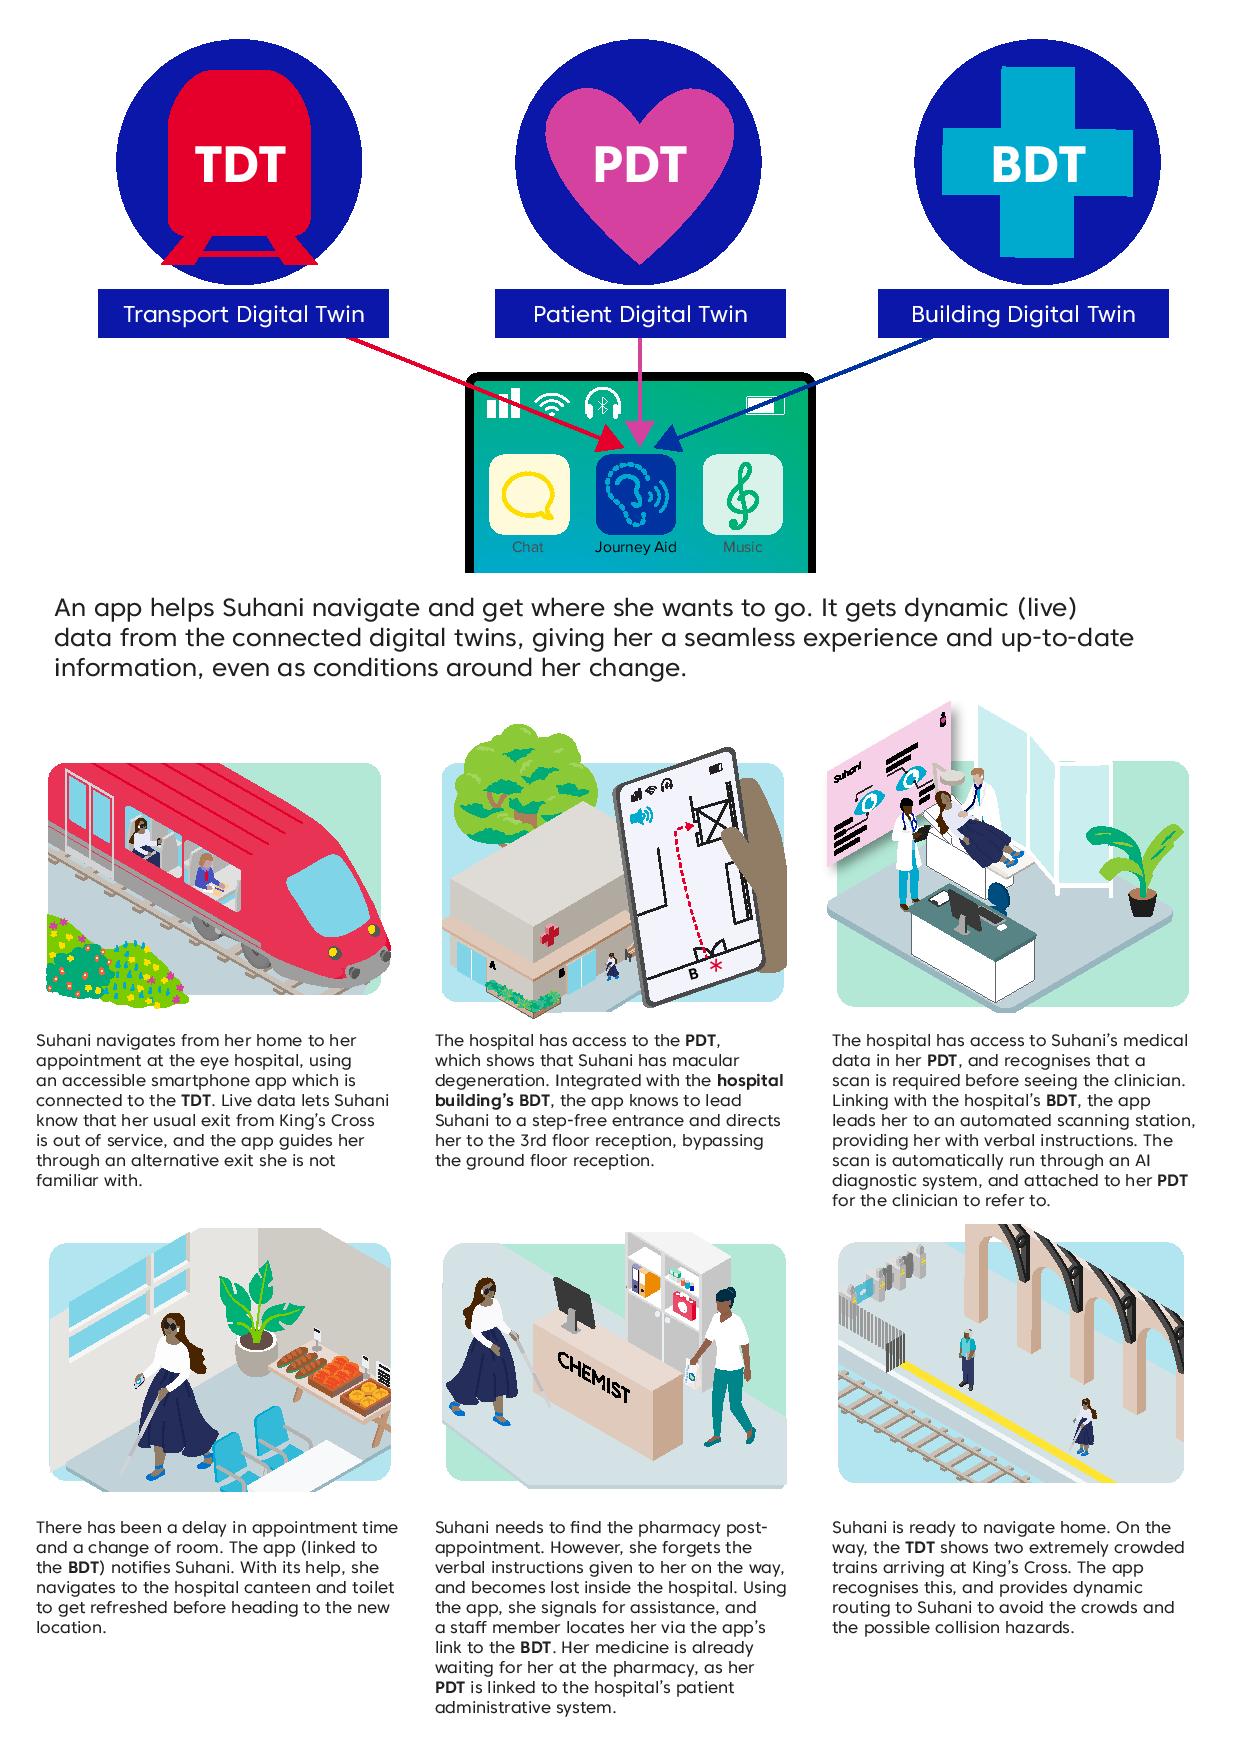 Preview of infographic about user journeys with connected digital twins.